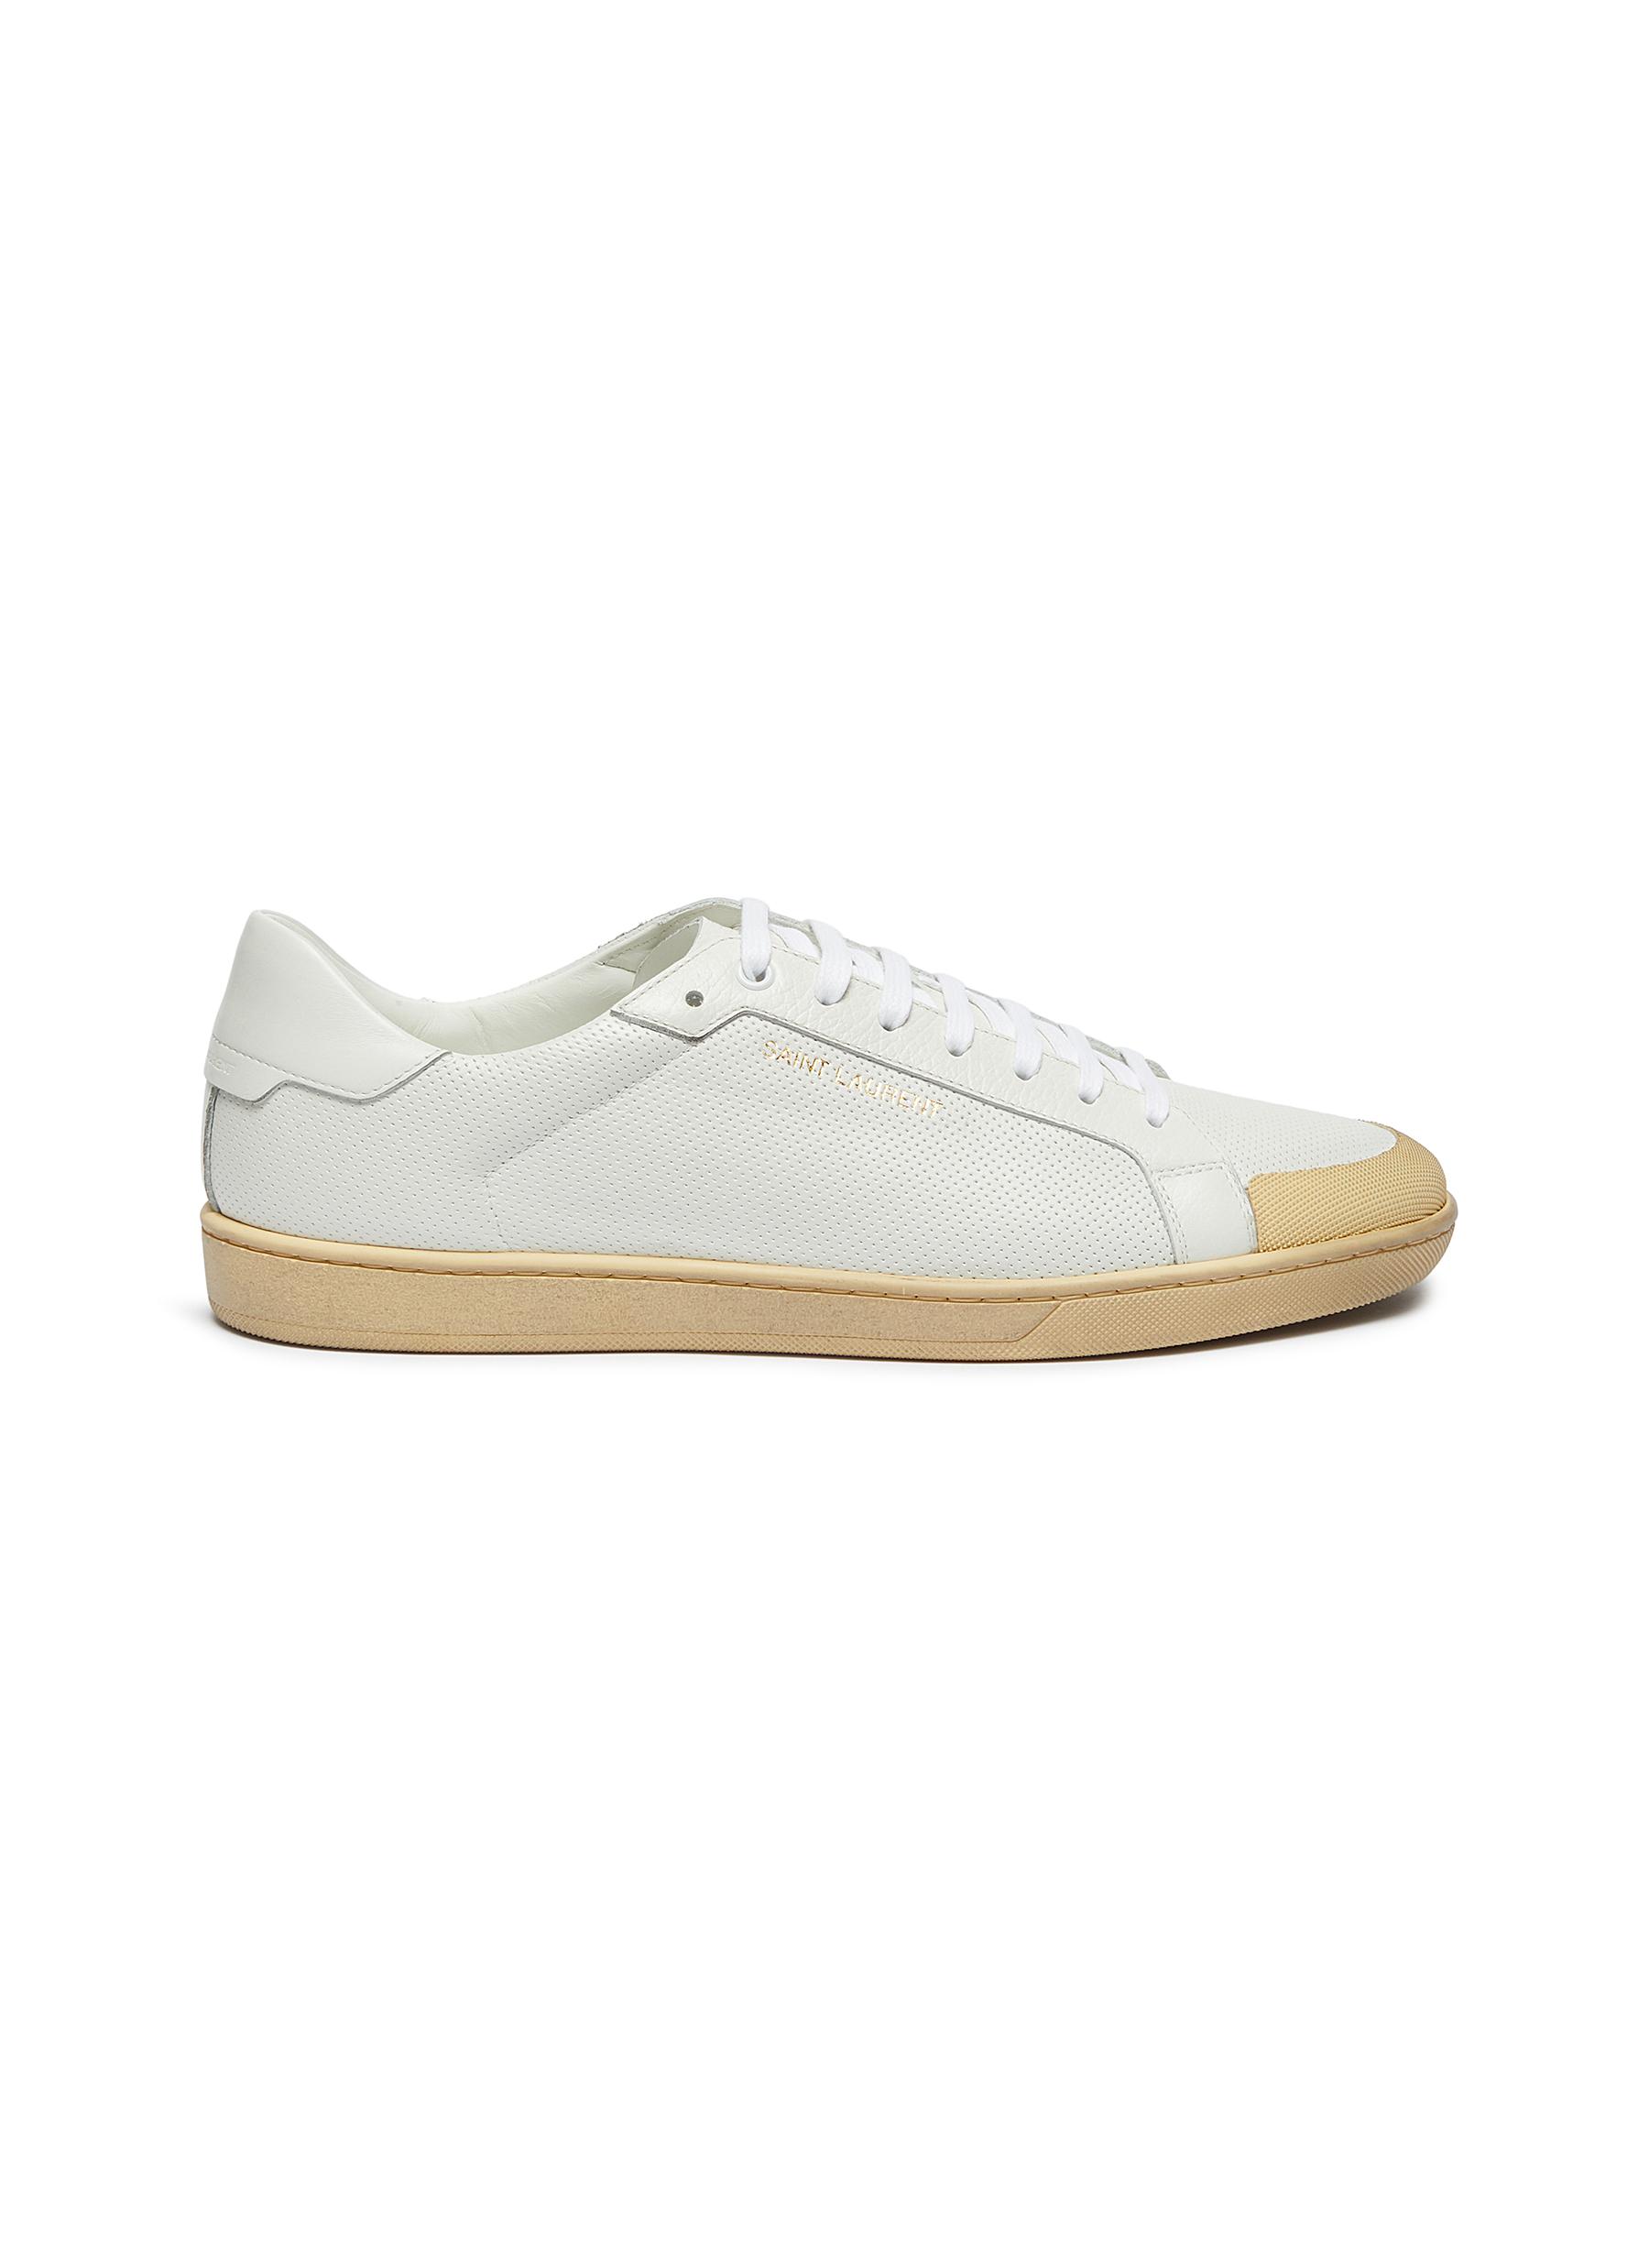 'Court Classic SL/39' Low-top Leather Sneakers